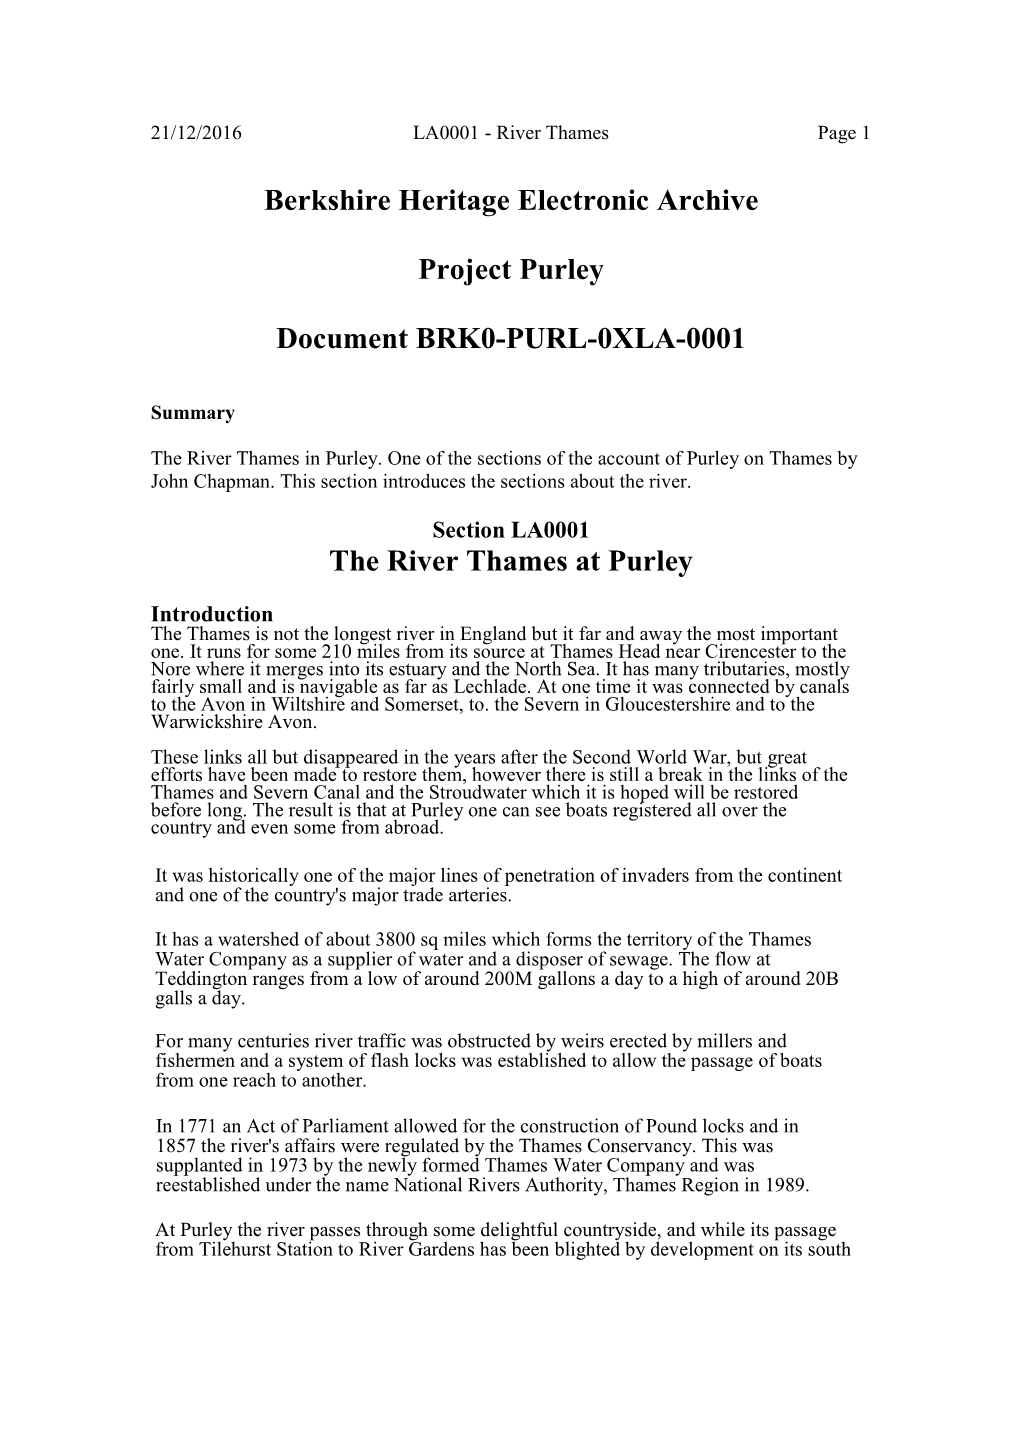 Berkshire Heritage Electronic Archive Project Purley Document BRK0